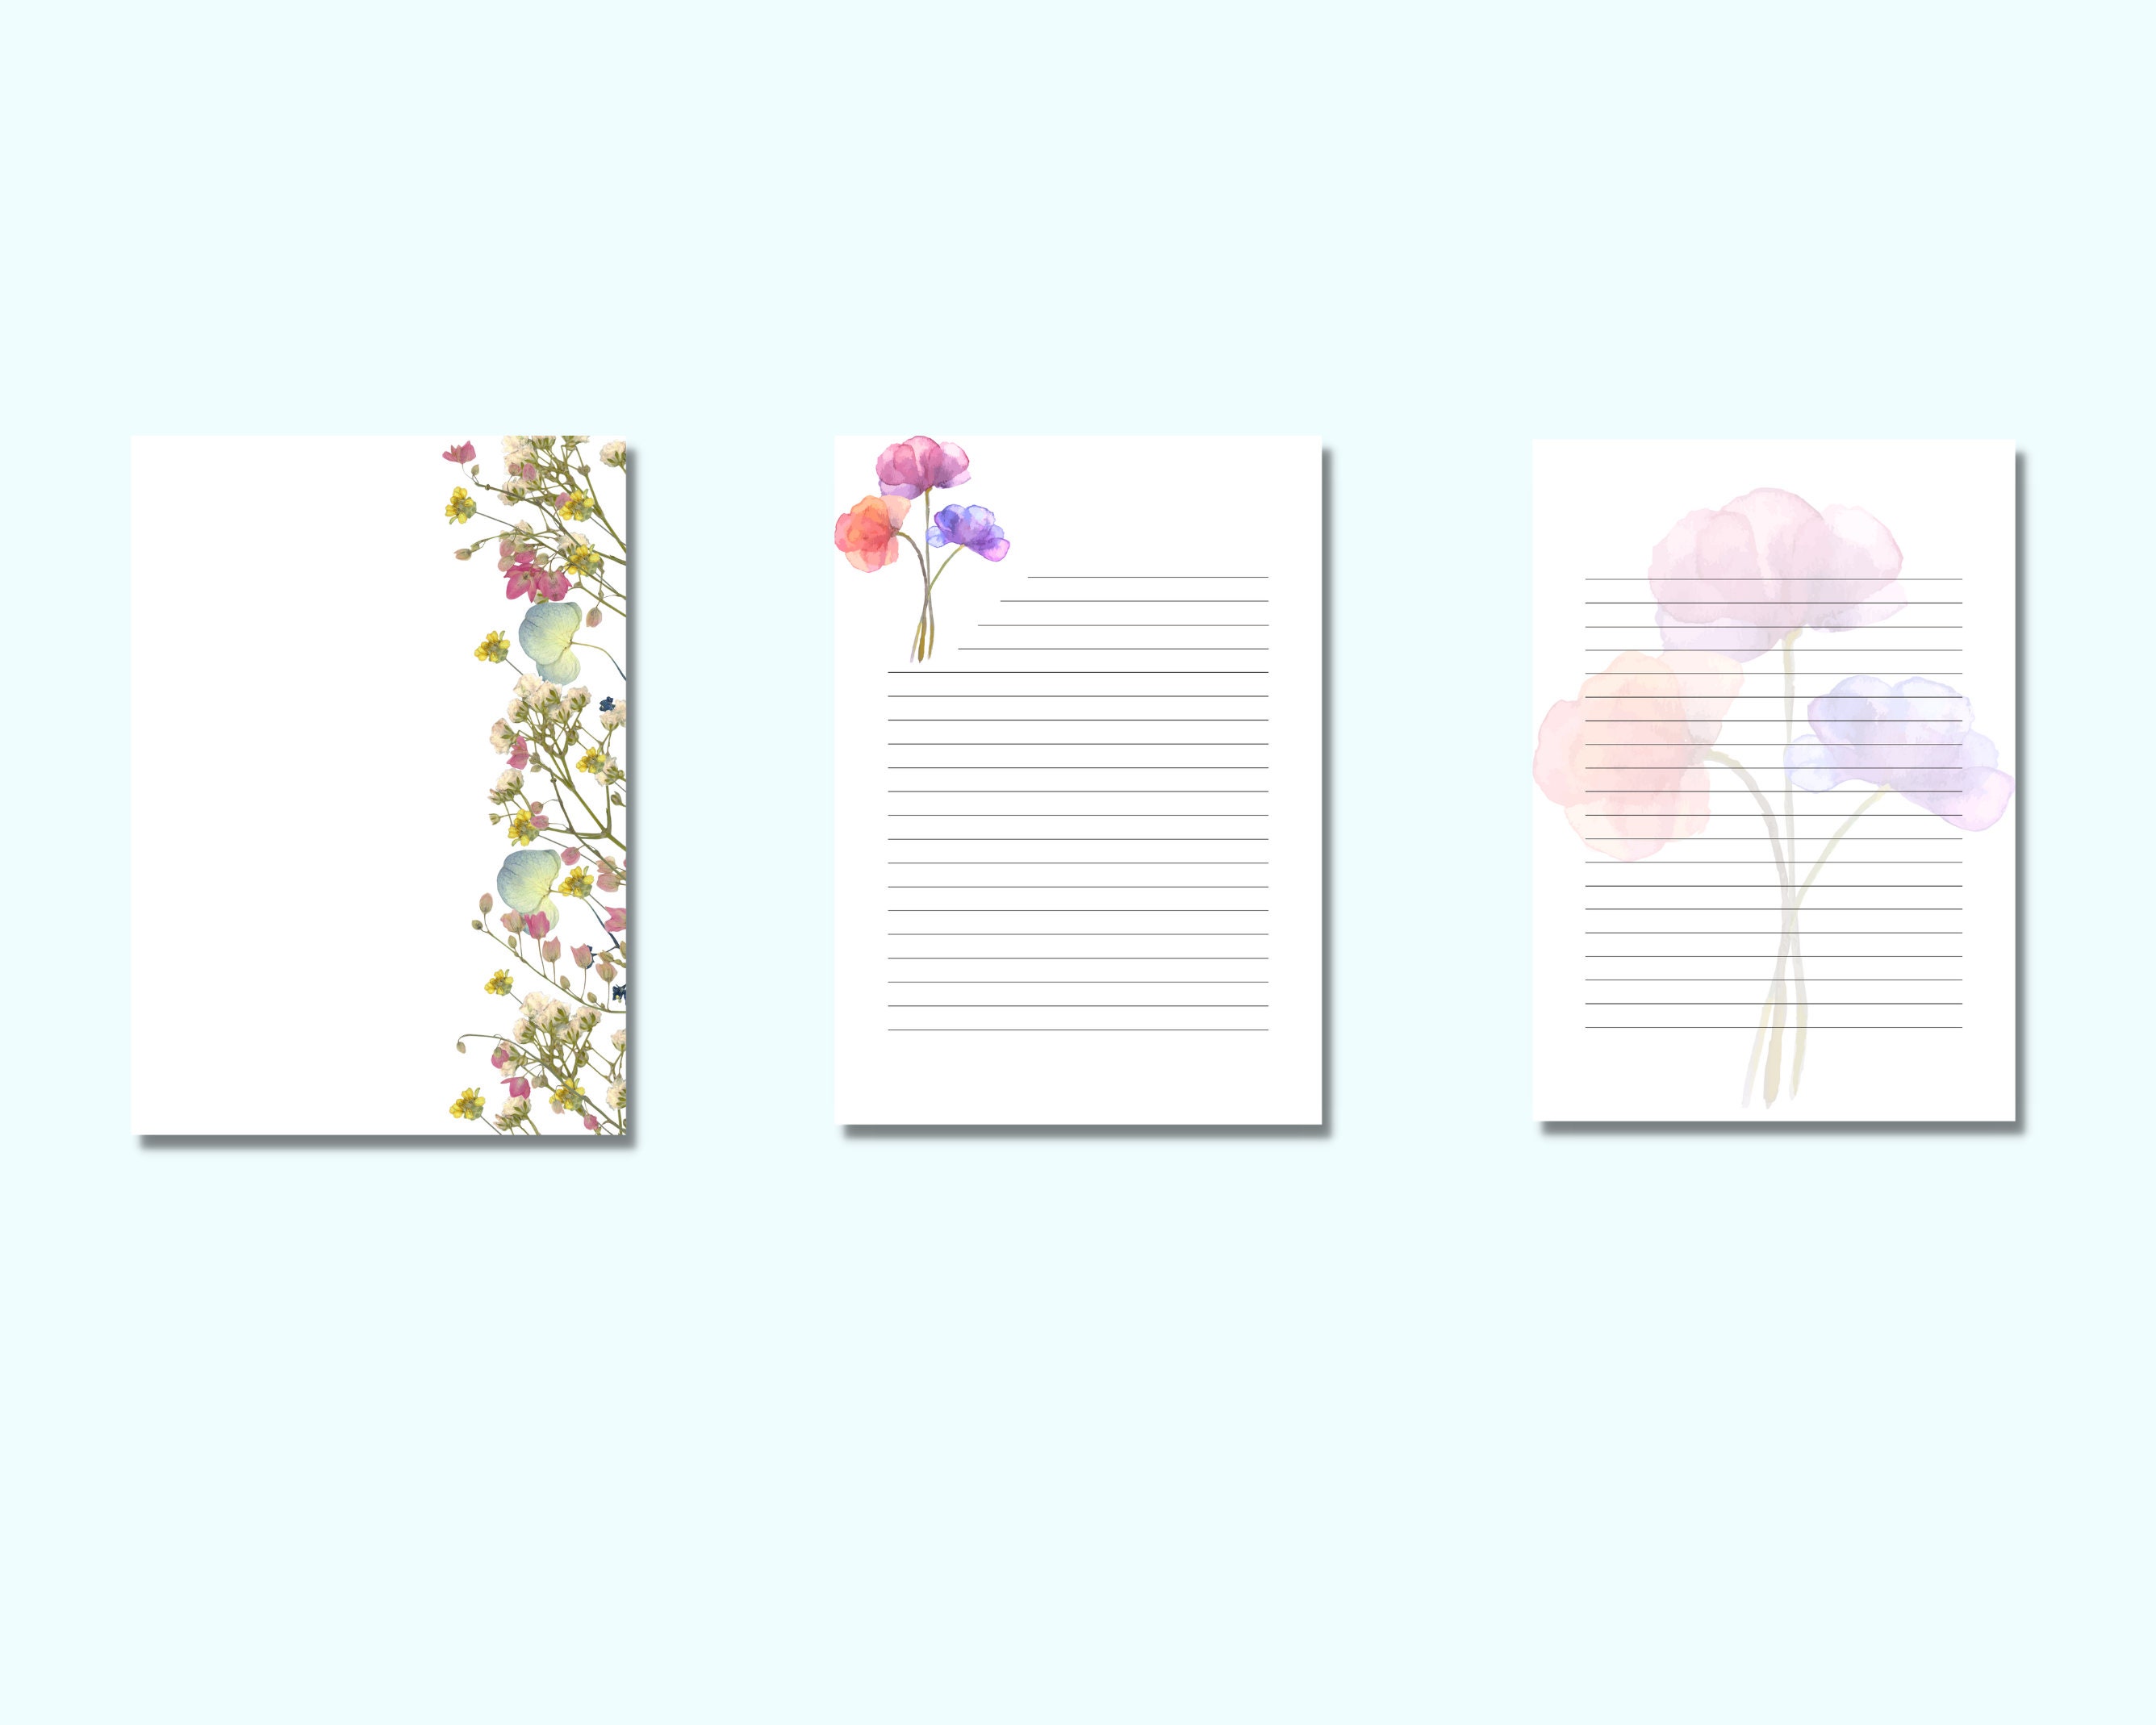 Digital Note Paper Letter Writing Template Downloadable Stationery